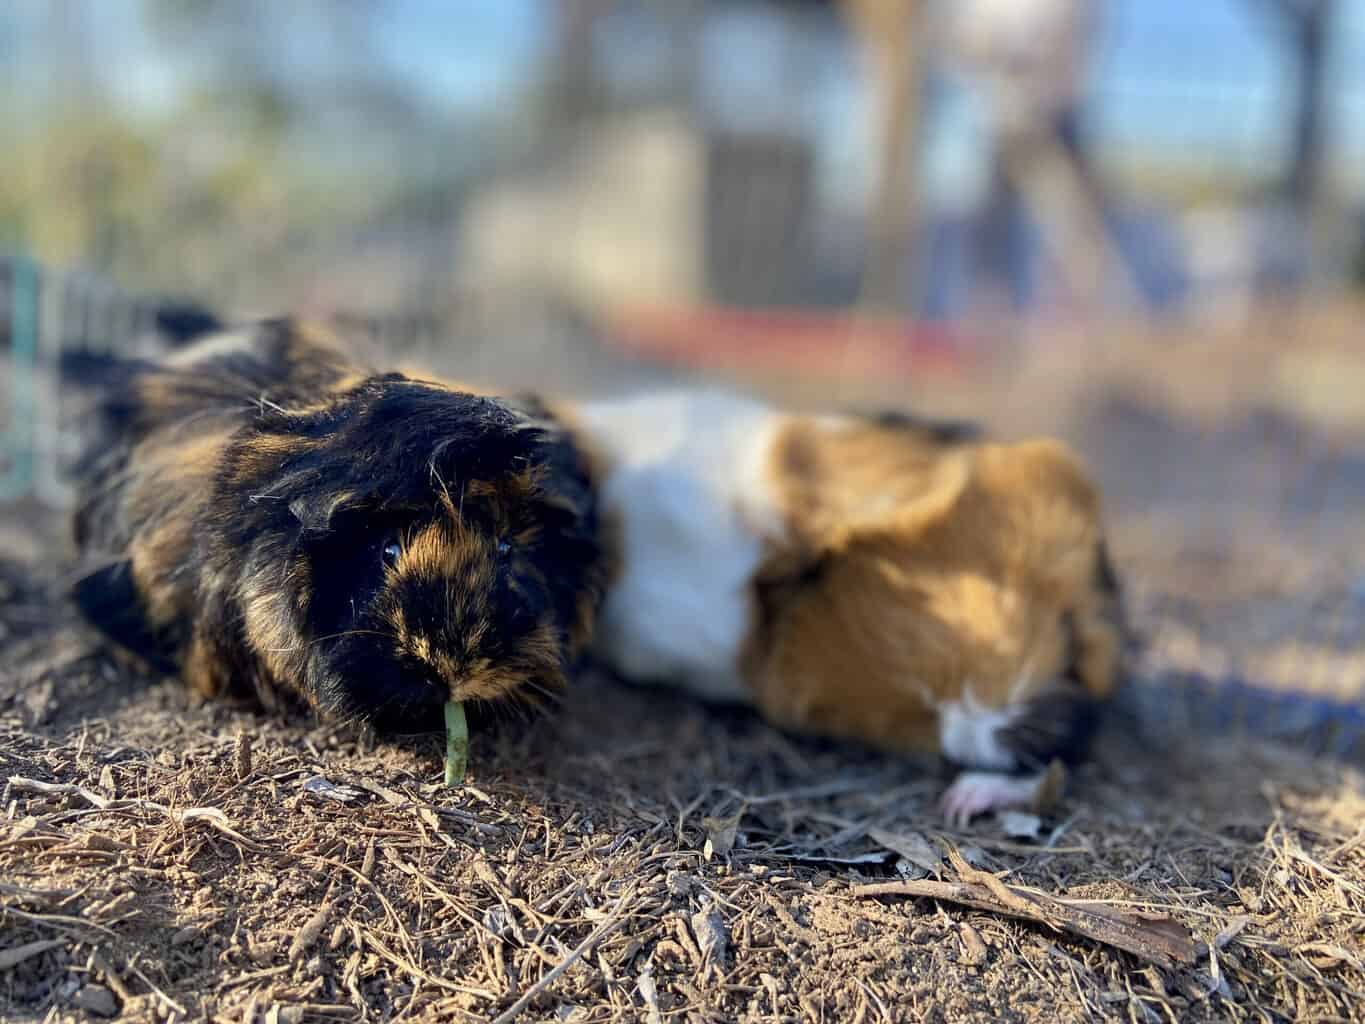 A guinea pig with brown and black fur eating a leaf on the dry ground